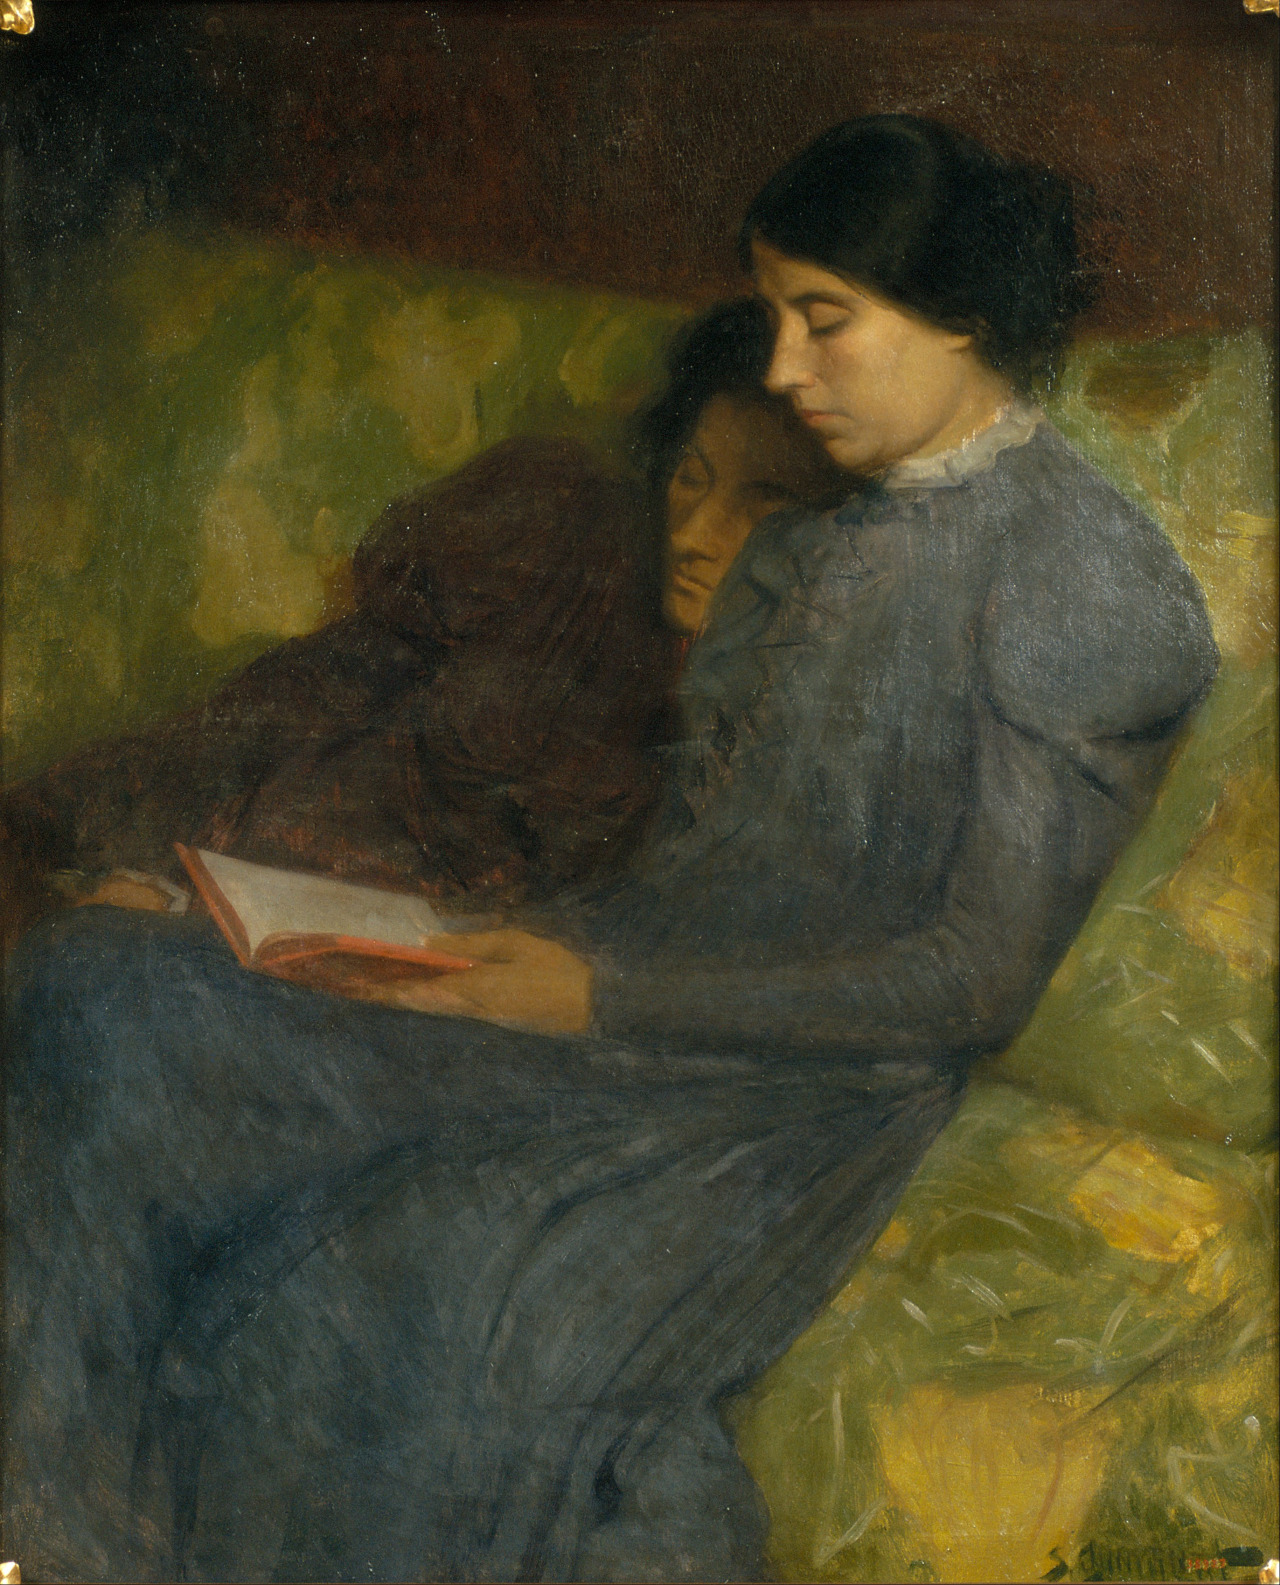 Chlorosis (c.1899). Sebastià Junyent (Spanish, 1865-1908). Oil on canvas. Museu Nacional d'Art de Catalunya.
Chlorosis is anemia caused by iron deficiency, especially in adolescent girls, causing a pale, faintly greenish complexion. It was a common...